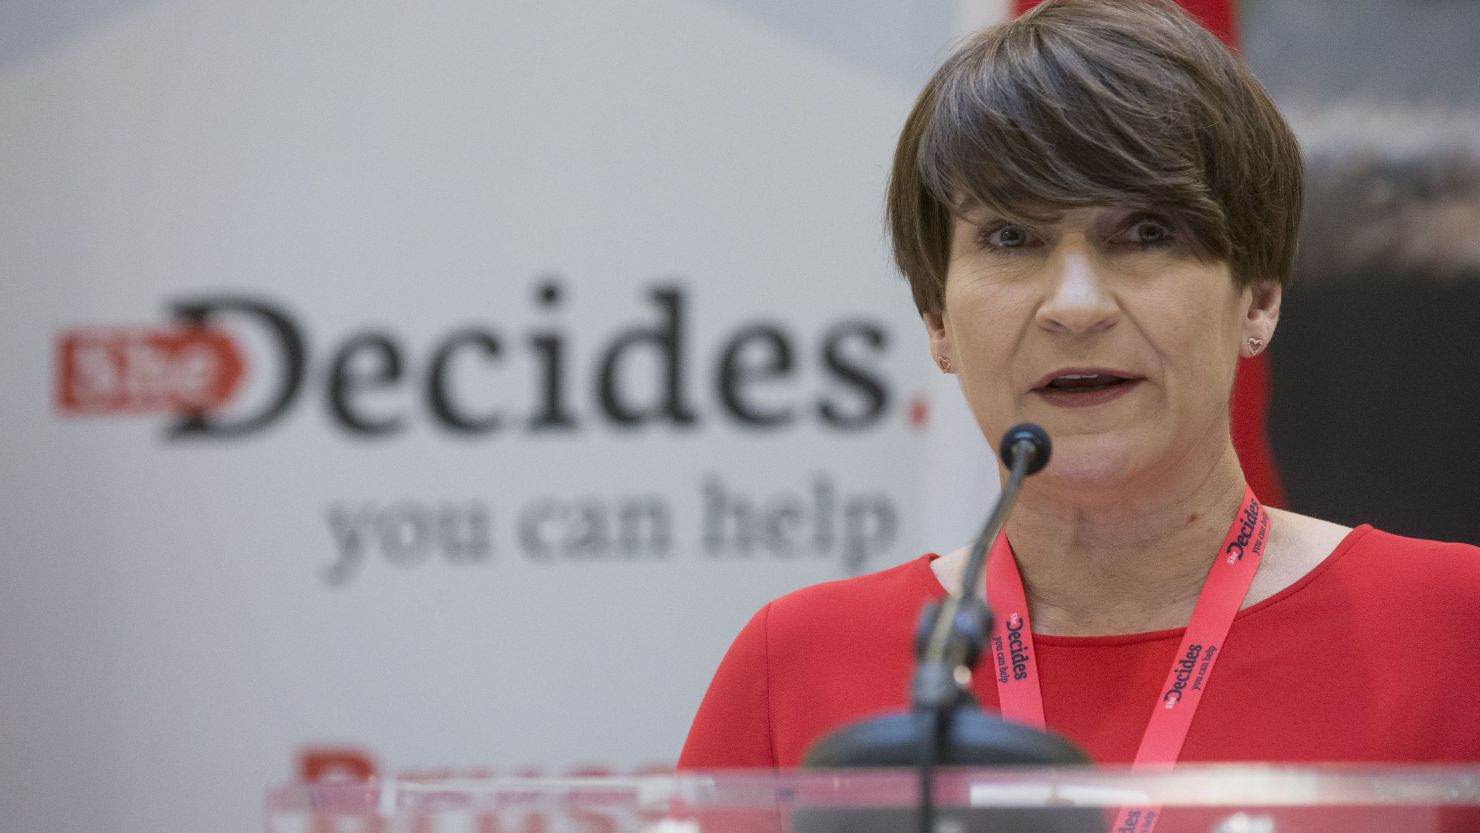 Dutch Development Minister Lilianne Ploumen, who launched She Decides, speaks at conference.